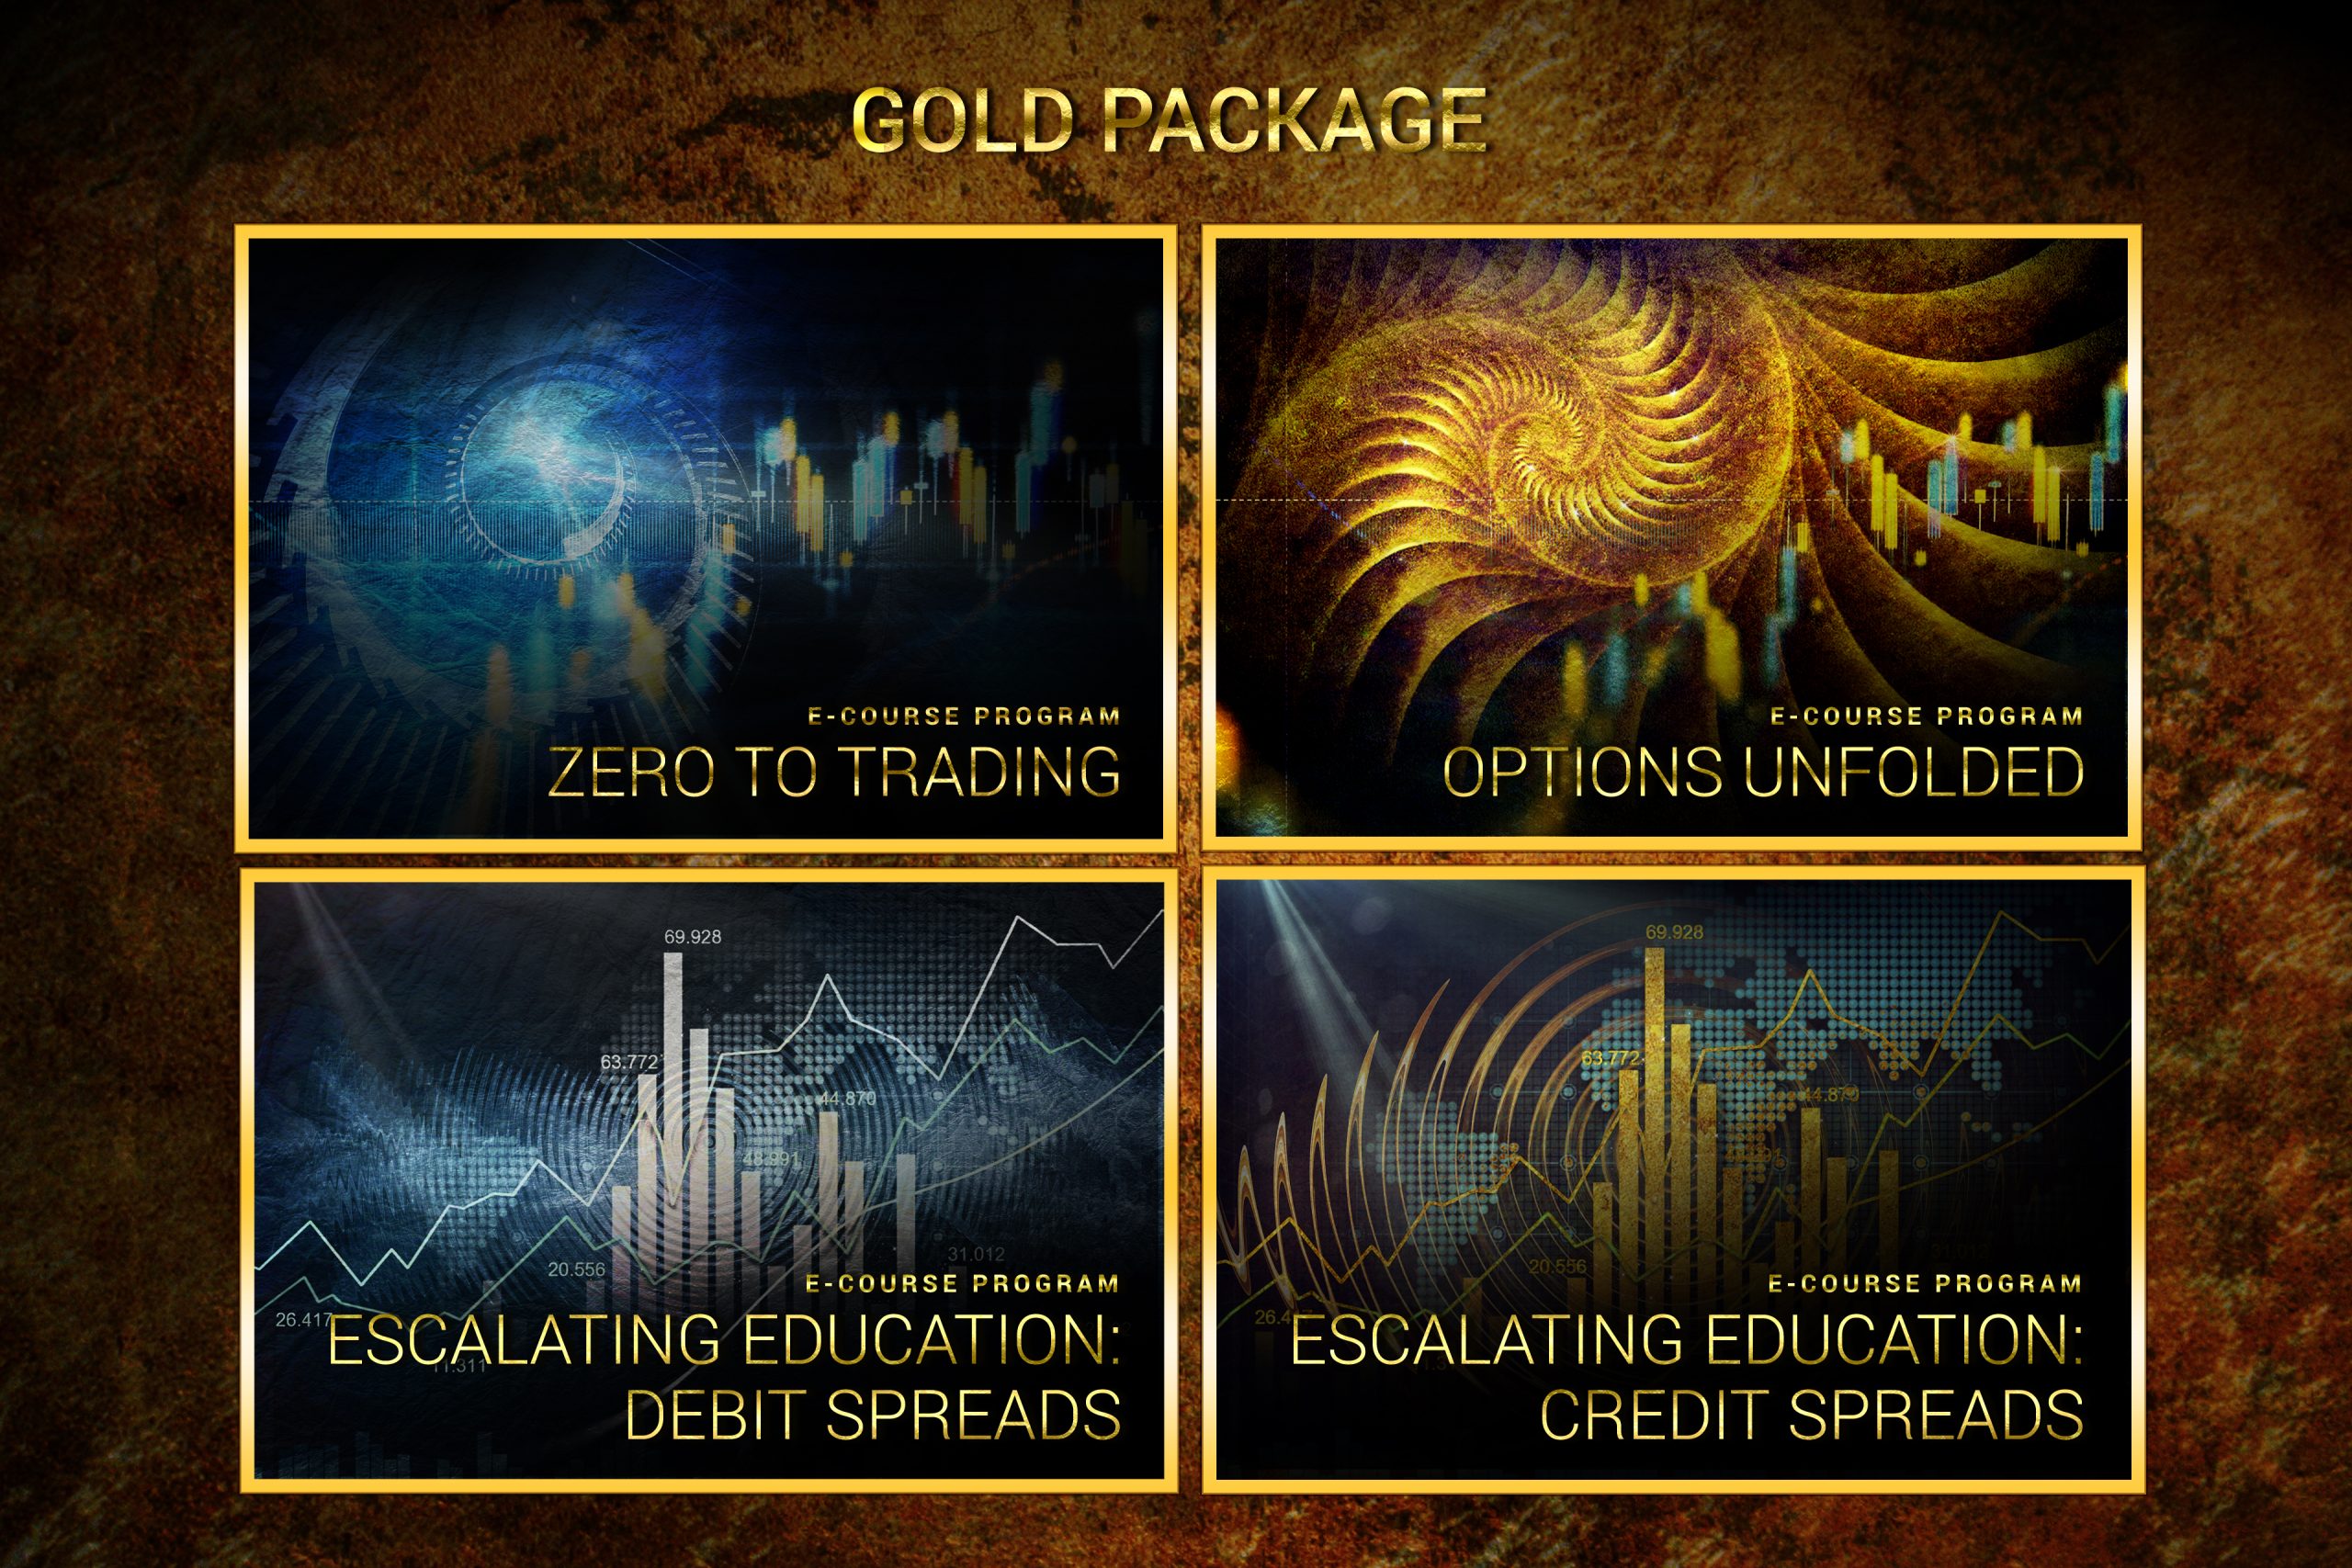 Gold Package image